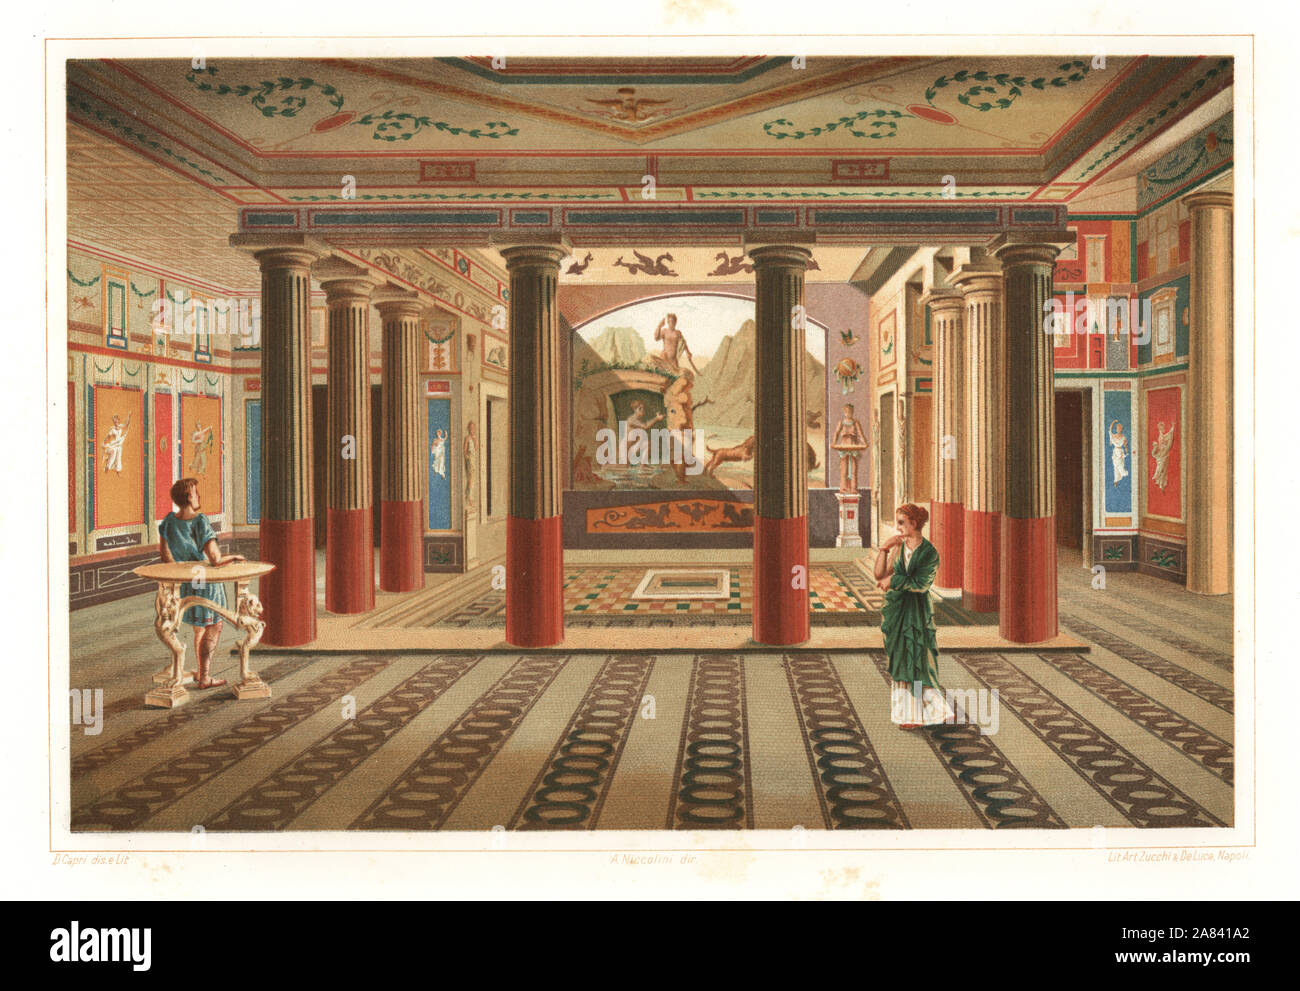 View of the Venereum of the House of Sallust, Reg VI, Ins 2, 3-5,30, Pompeii. The large painting on the rear wall shows Actaeon and Diana. Chromolithograph and illustration by D. Capri from Antonio Niccolini’s Pompeii: Views and Restorations (Pompeii: Essaies et Restaurations), published by Zucchi & De Luca, Naples, 1898. Antonio was grandson of the architect Antonio Niccolini Sr. Stock Photo